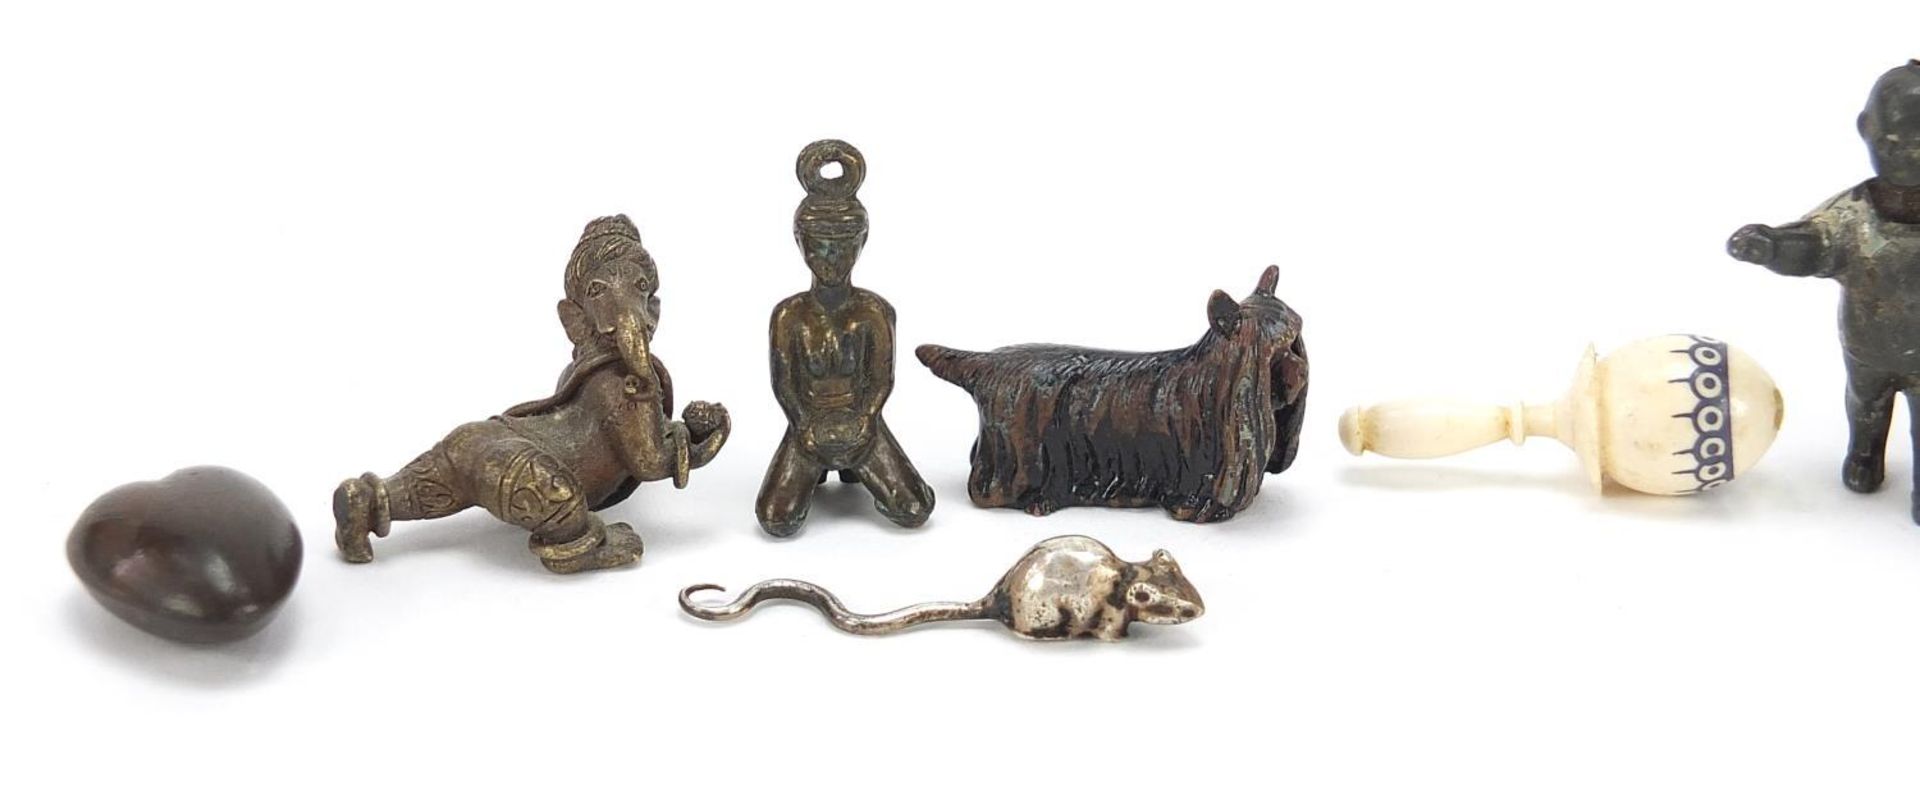 Miniature 19th century and later objects including an Austrian cold painted bronze dog, hedgehog, - Image 2 of 3